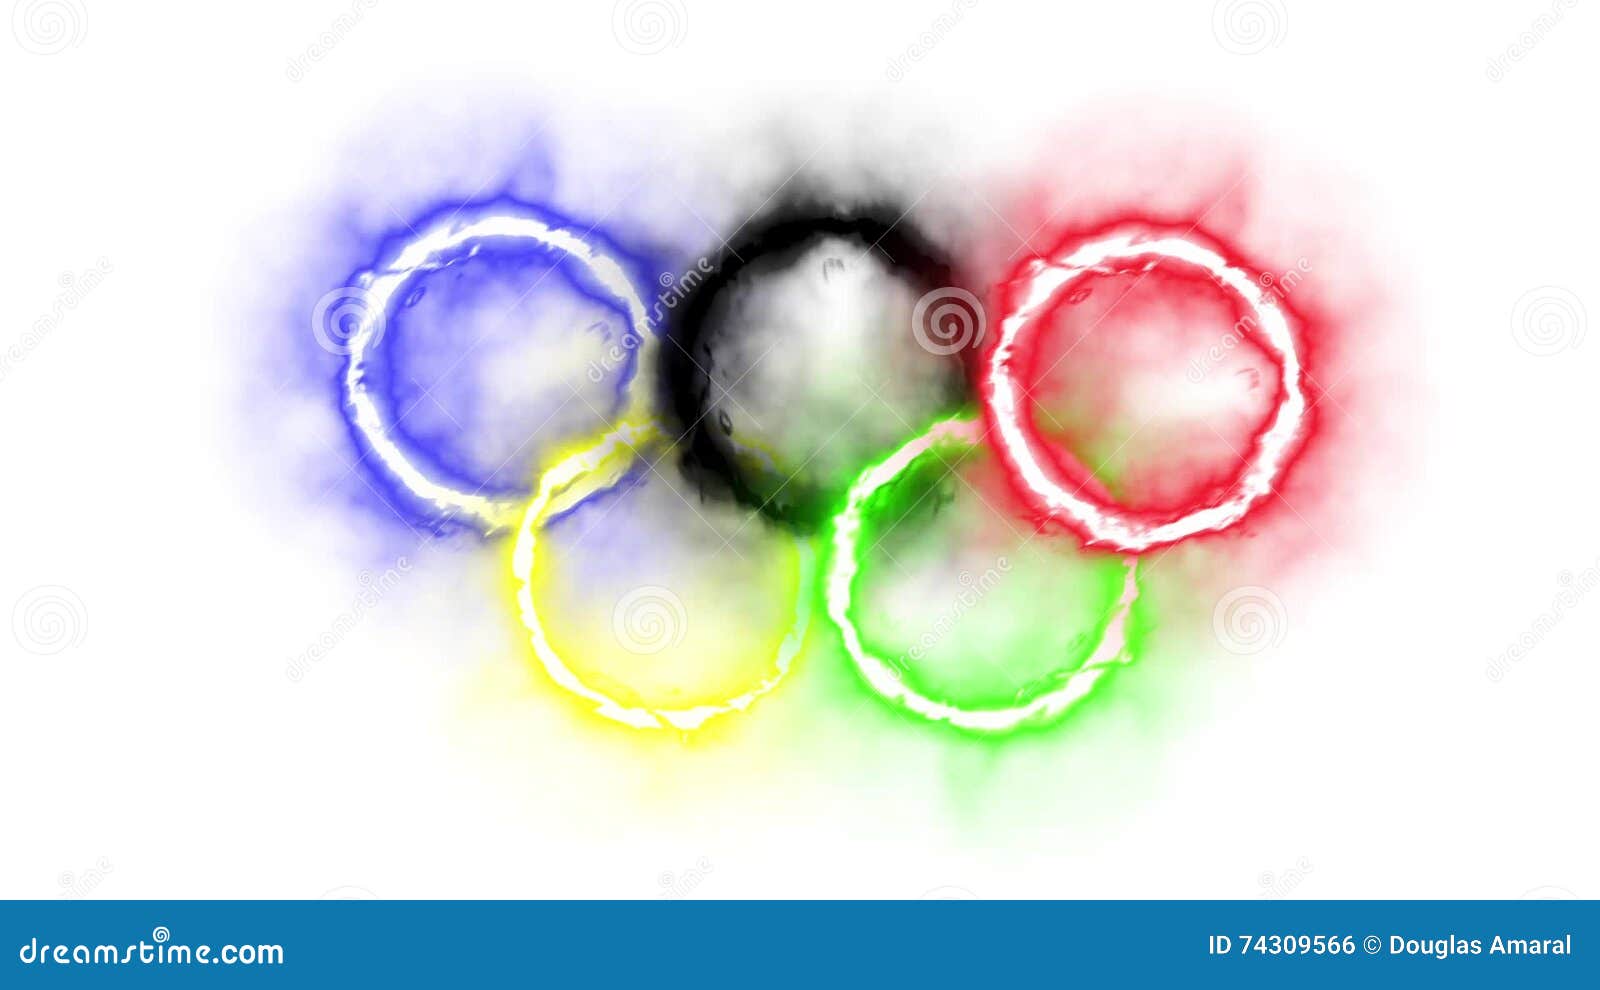 Olympic Rings Logo Png Transparent Background Photoshop - 477557 | TOPpng